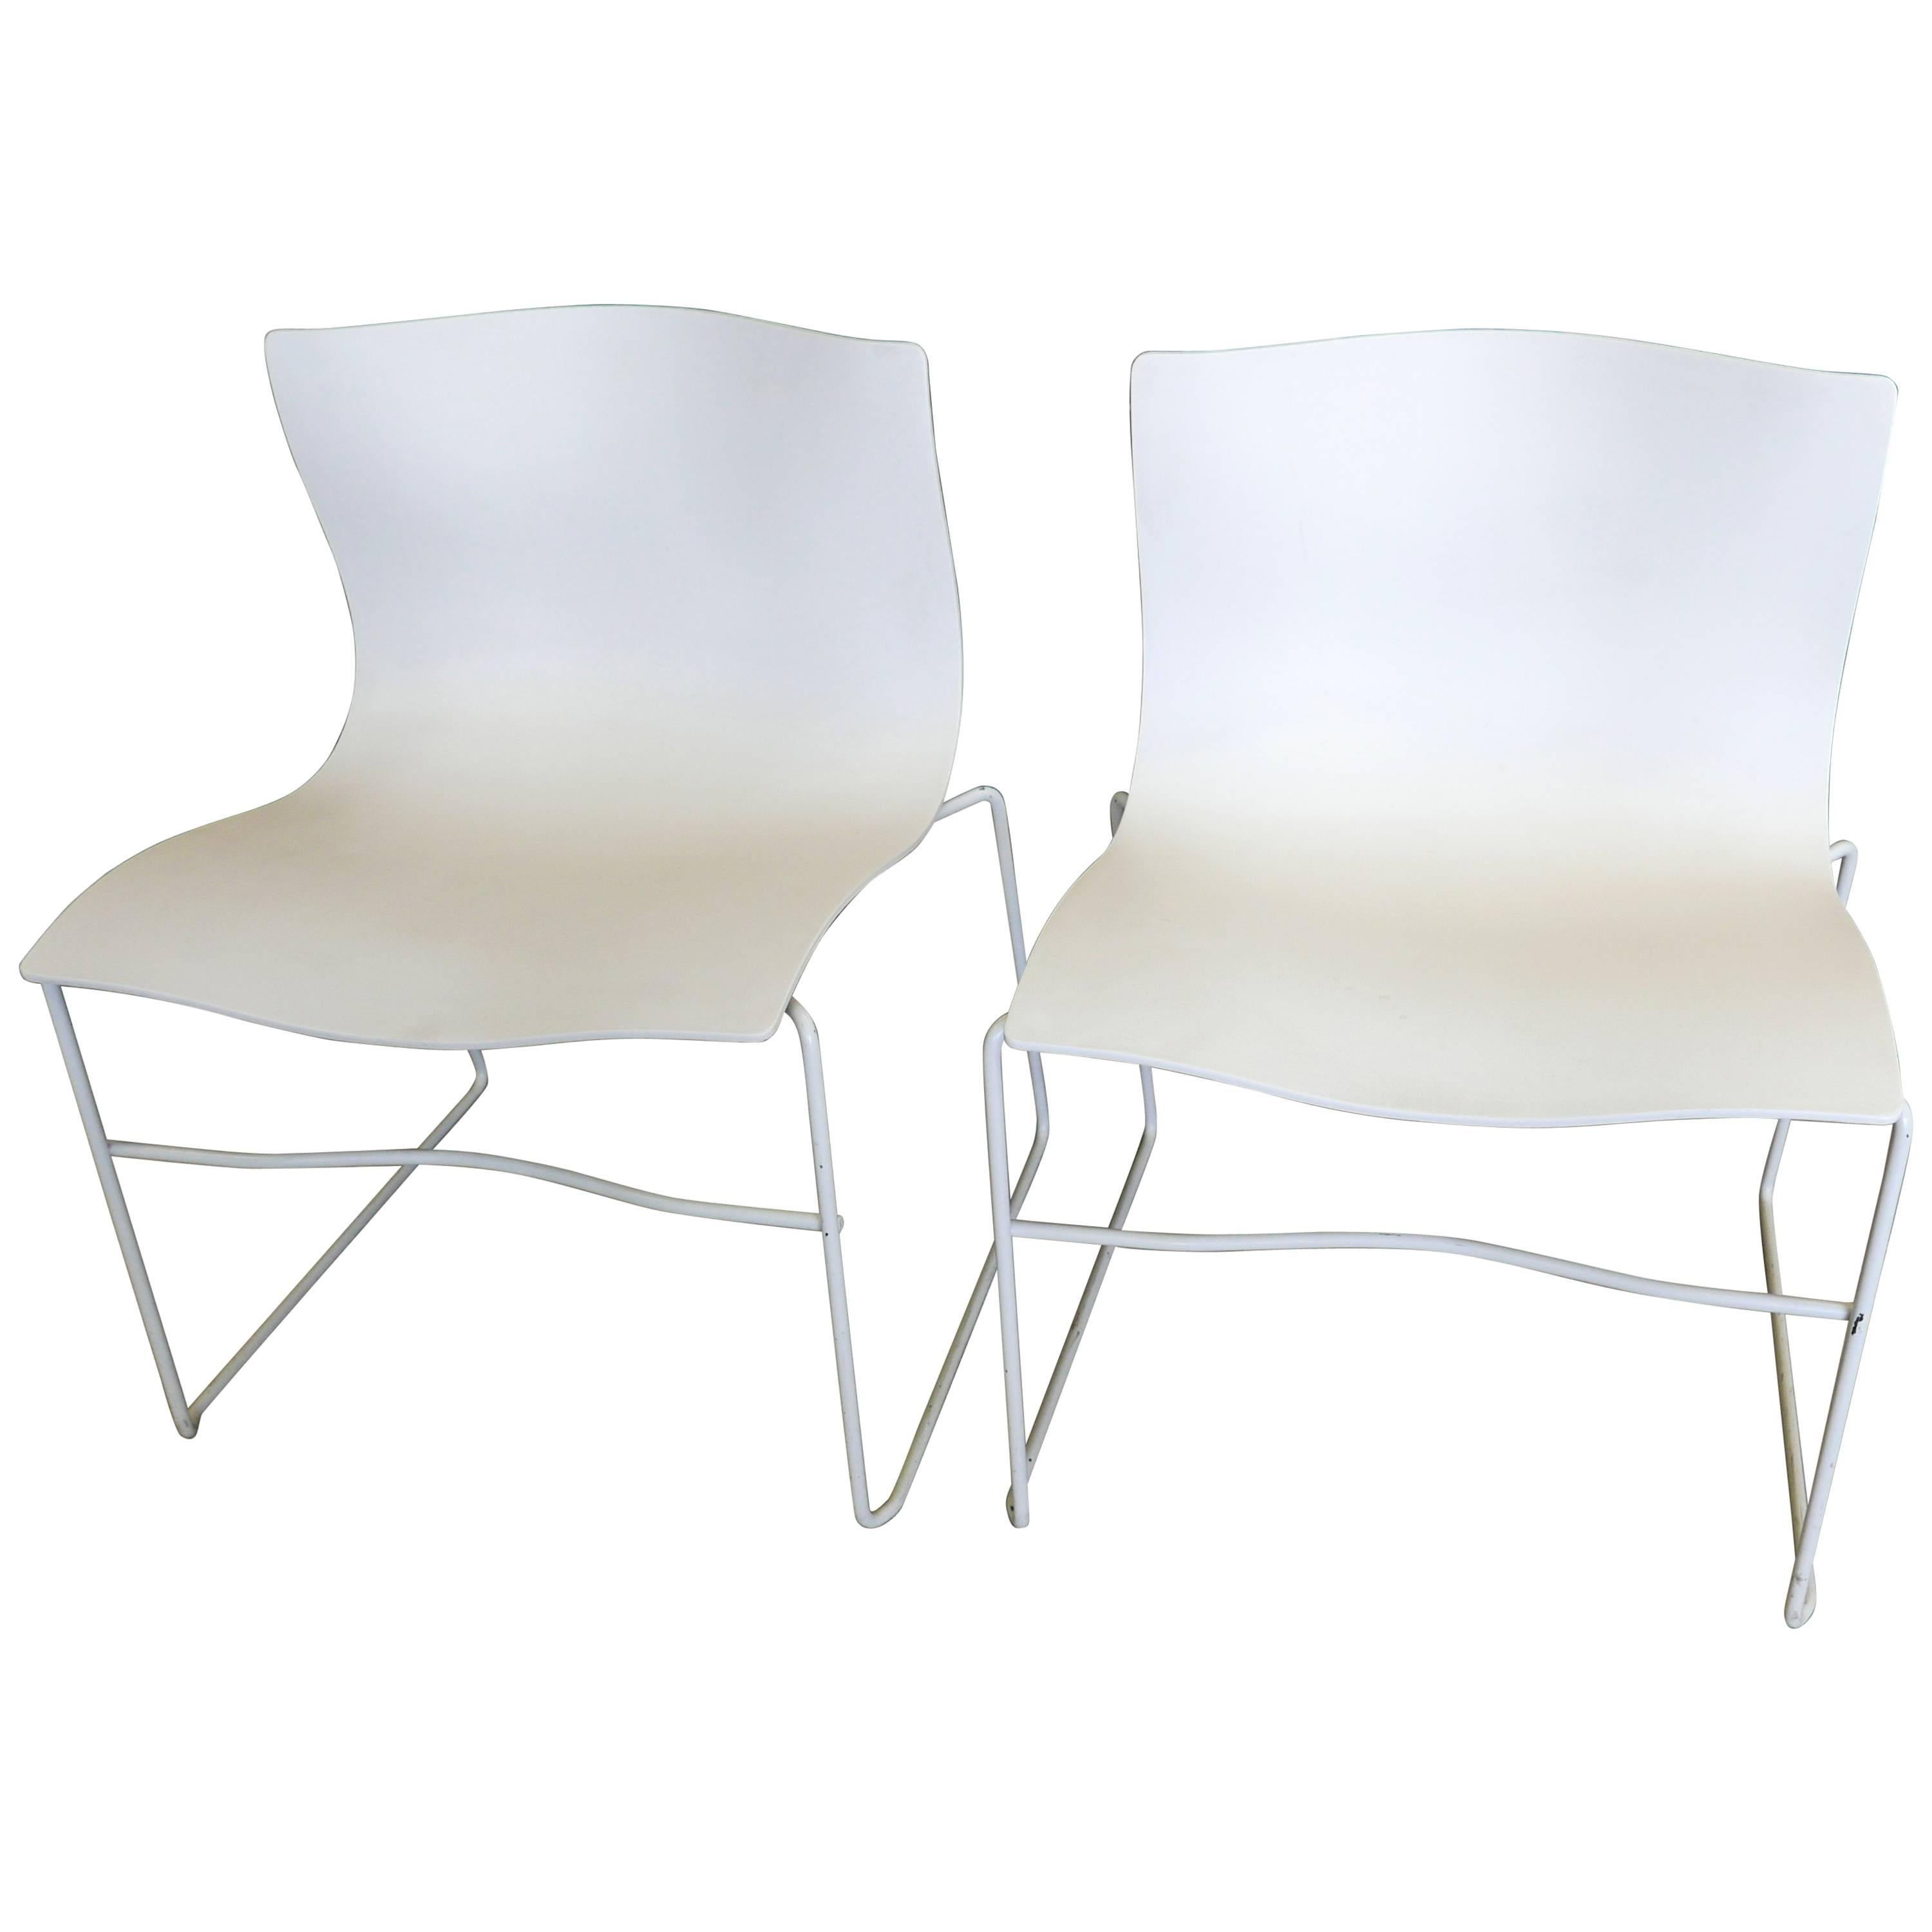 Knoll Mid-Century Chairs in White, Pair